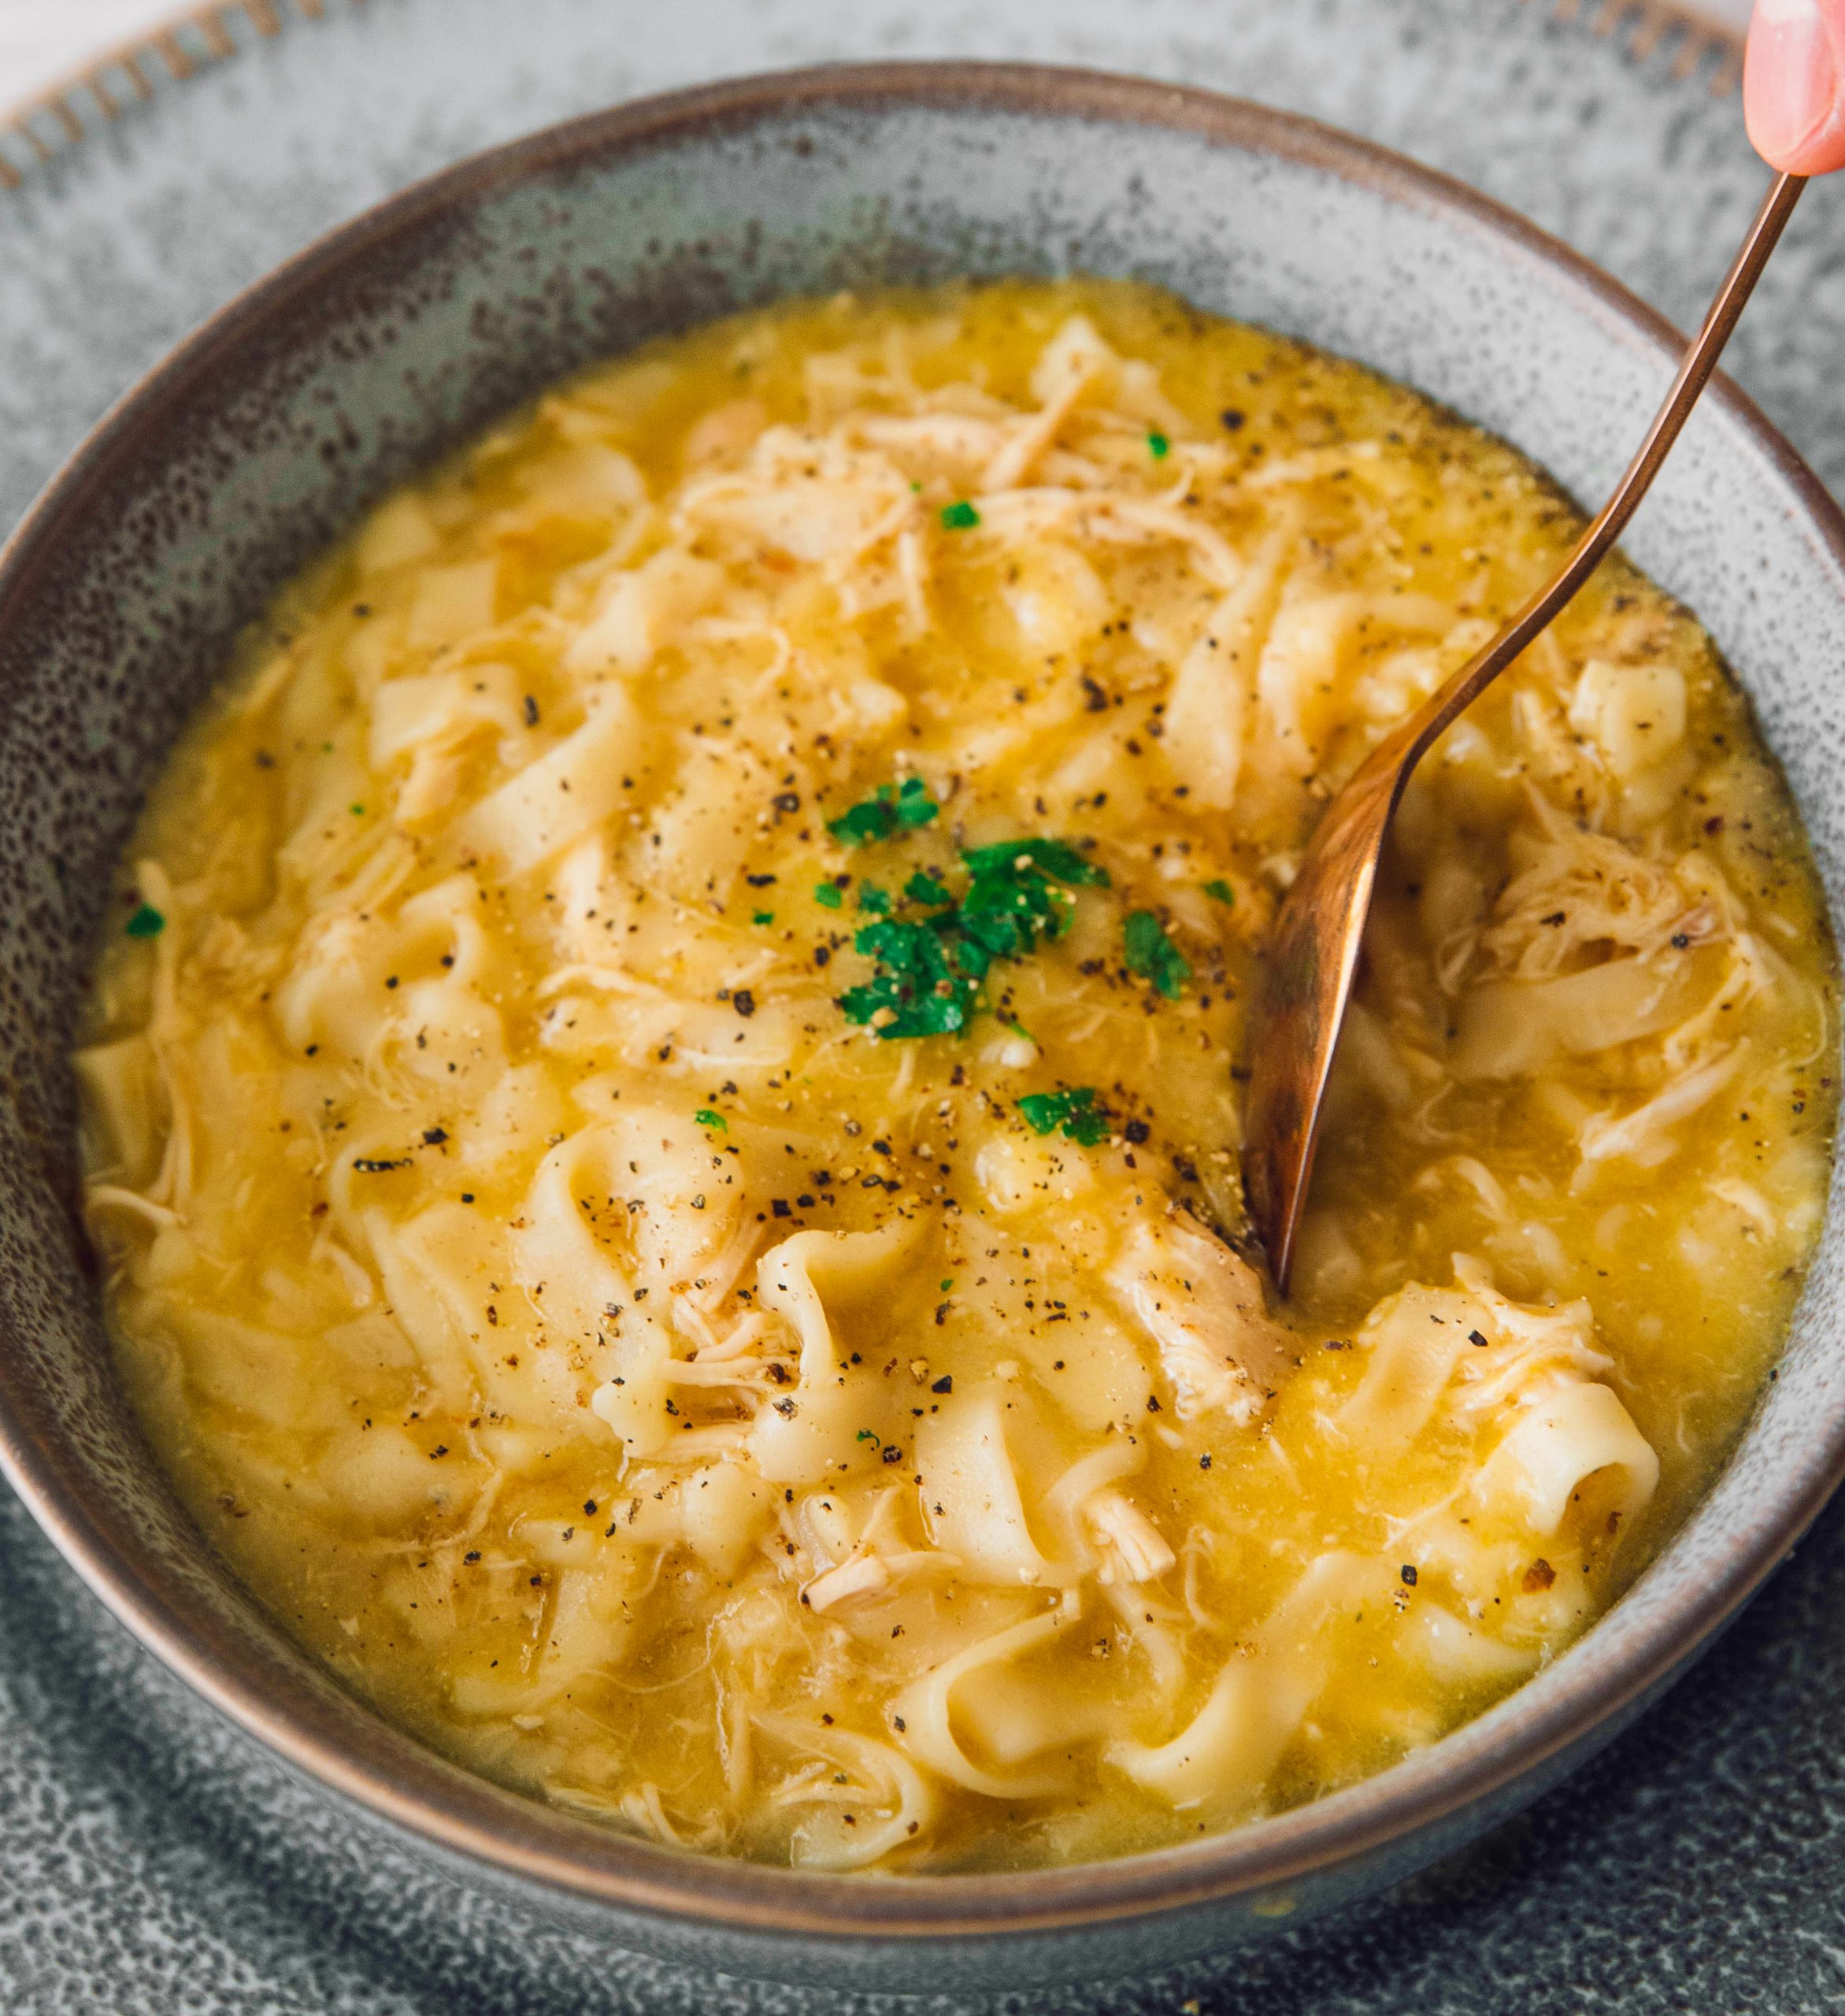 slow cooker chicken and noodles, chicken and noodles slow cooker, slow cooker chicken and noodles recipe